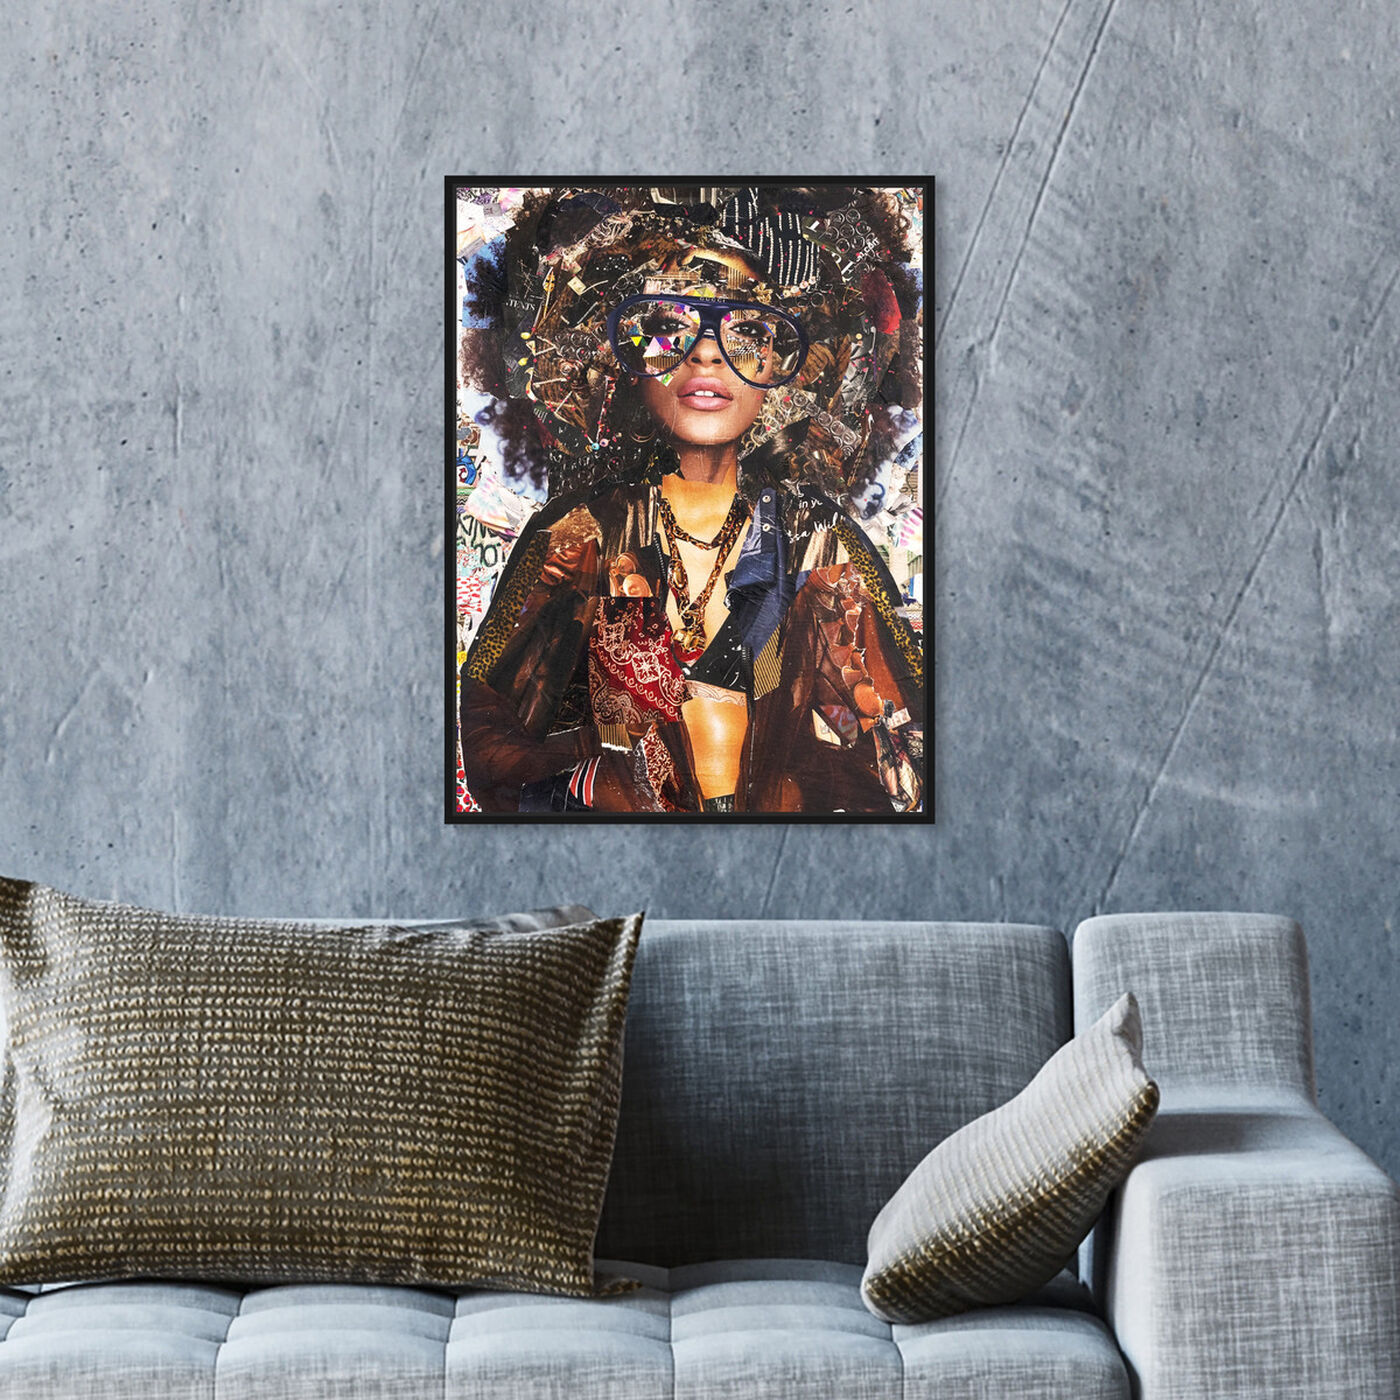 Hanging view of Katy Hirschfeld - Glam Fro featuring fashion and glam and portraits art.